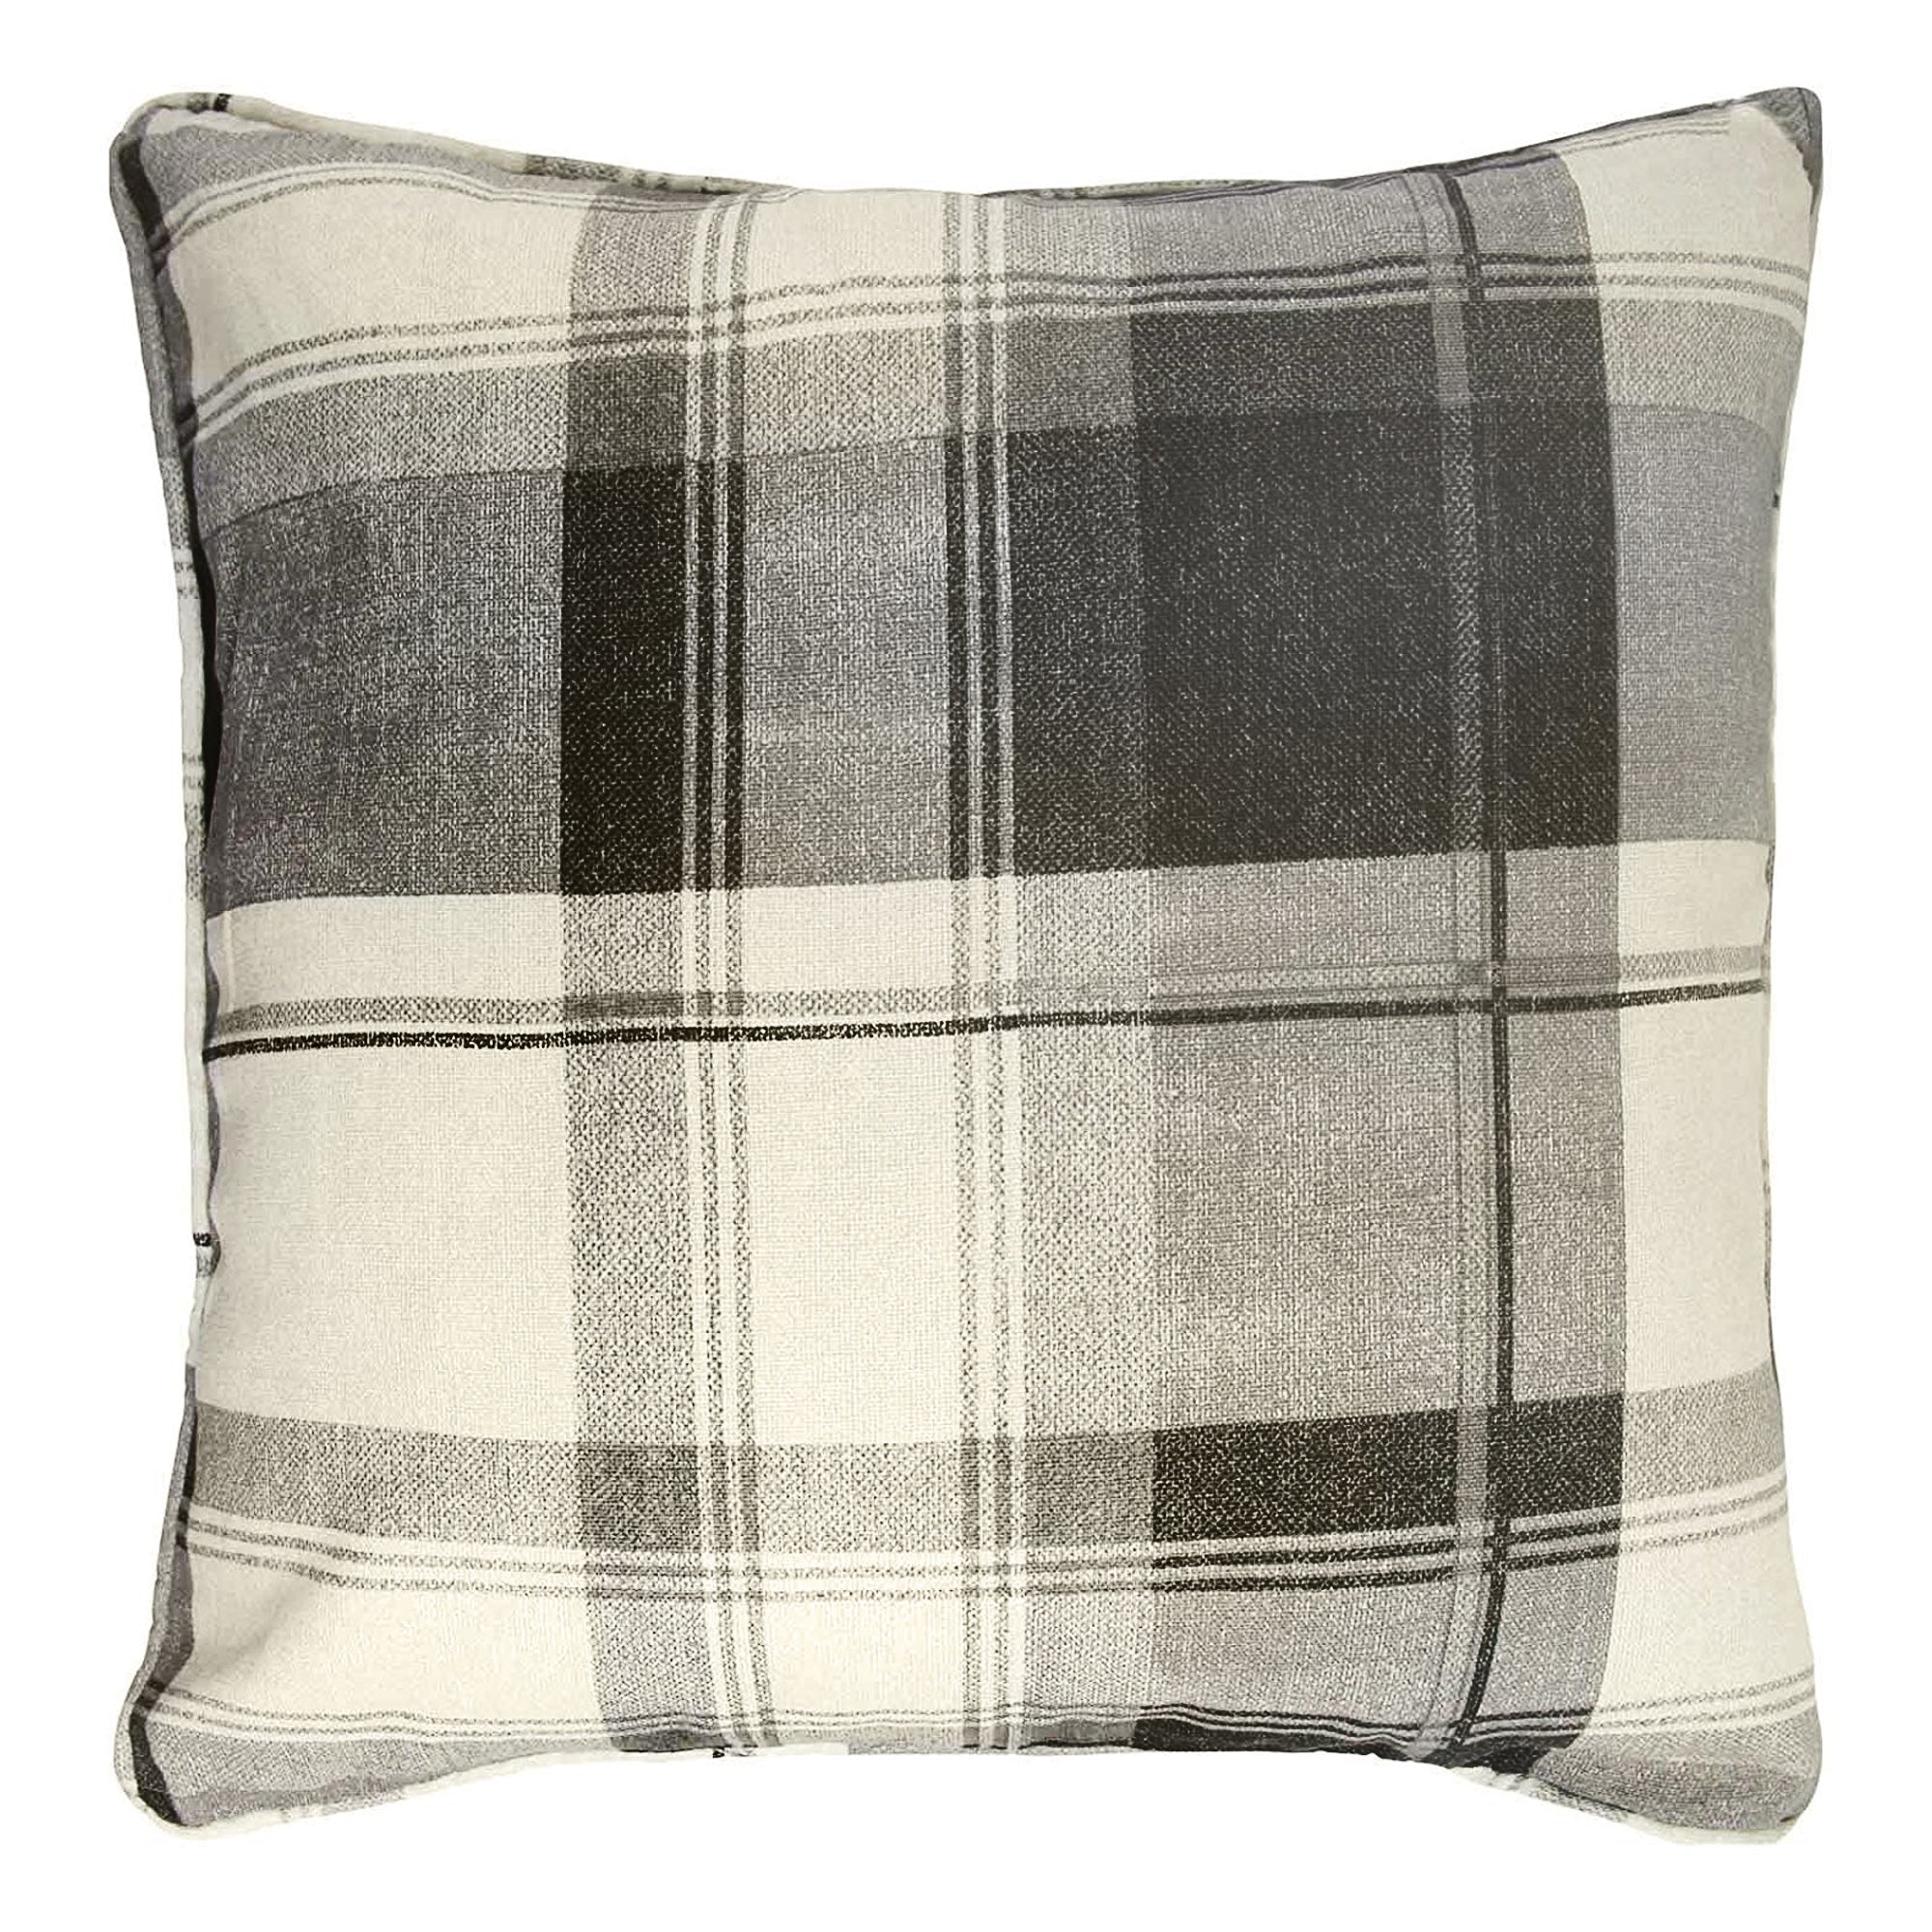 Balmoral Check - Square Cushion Cover - by Fusion